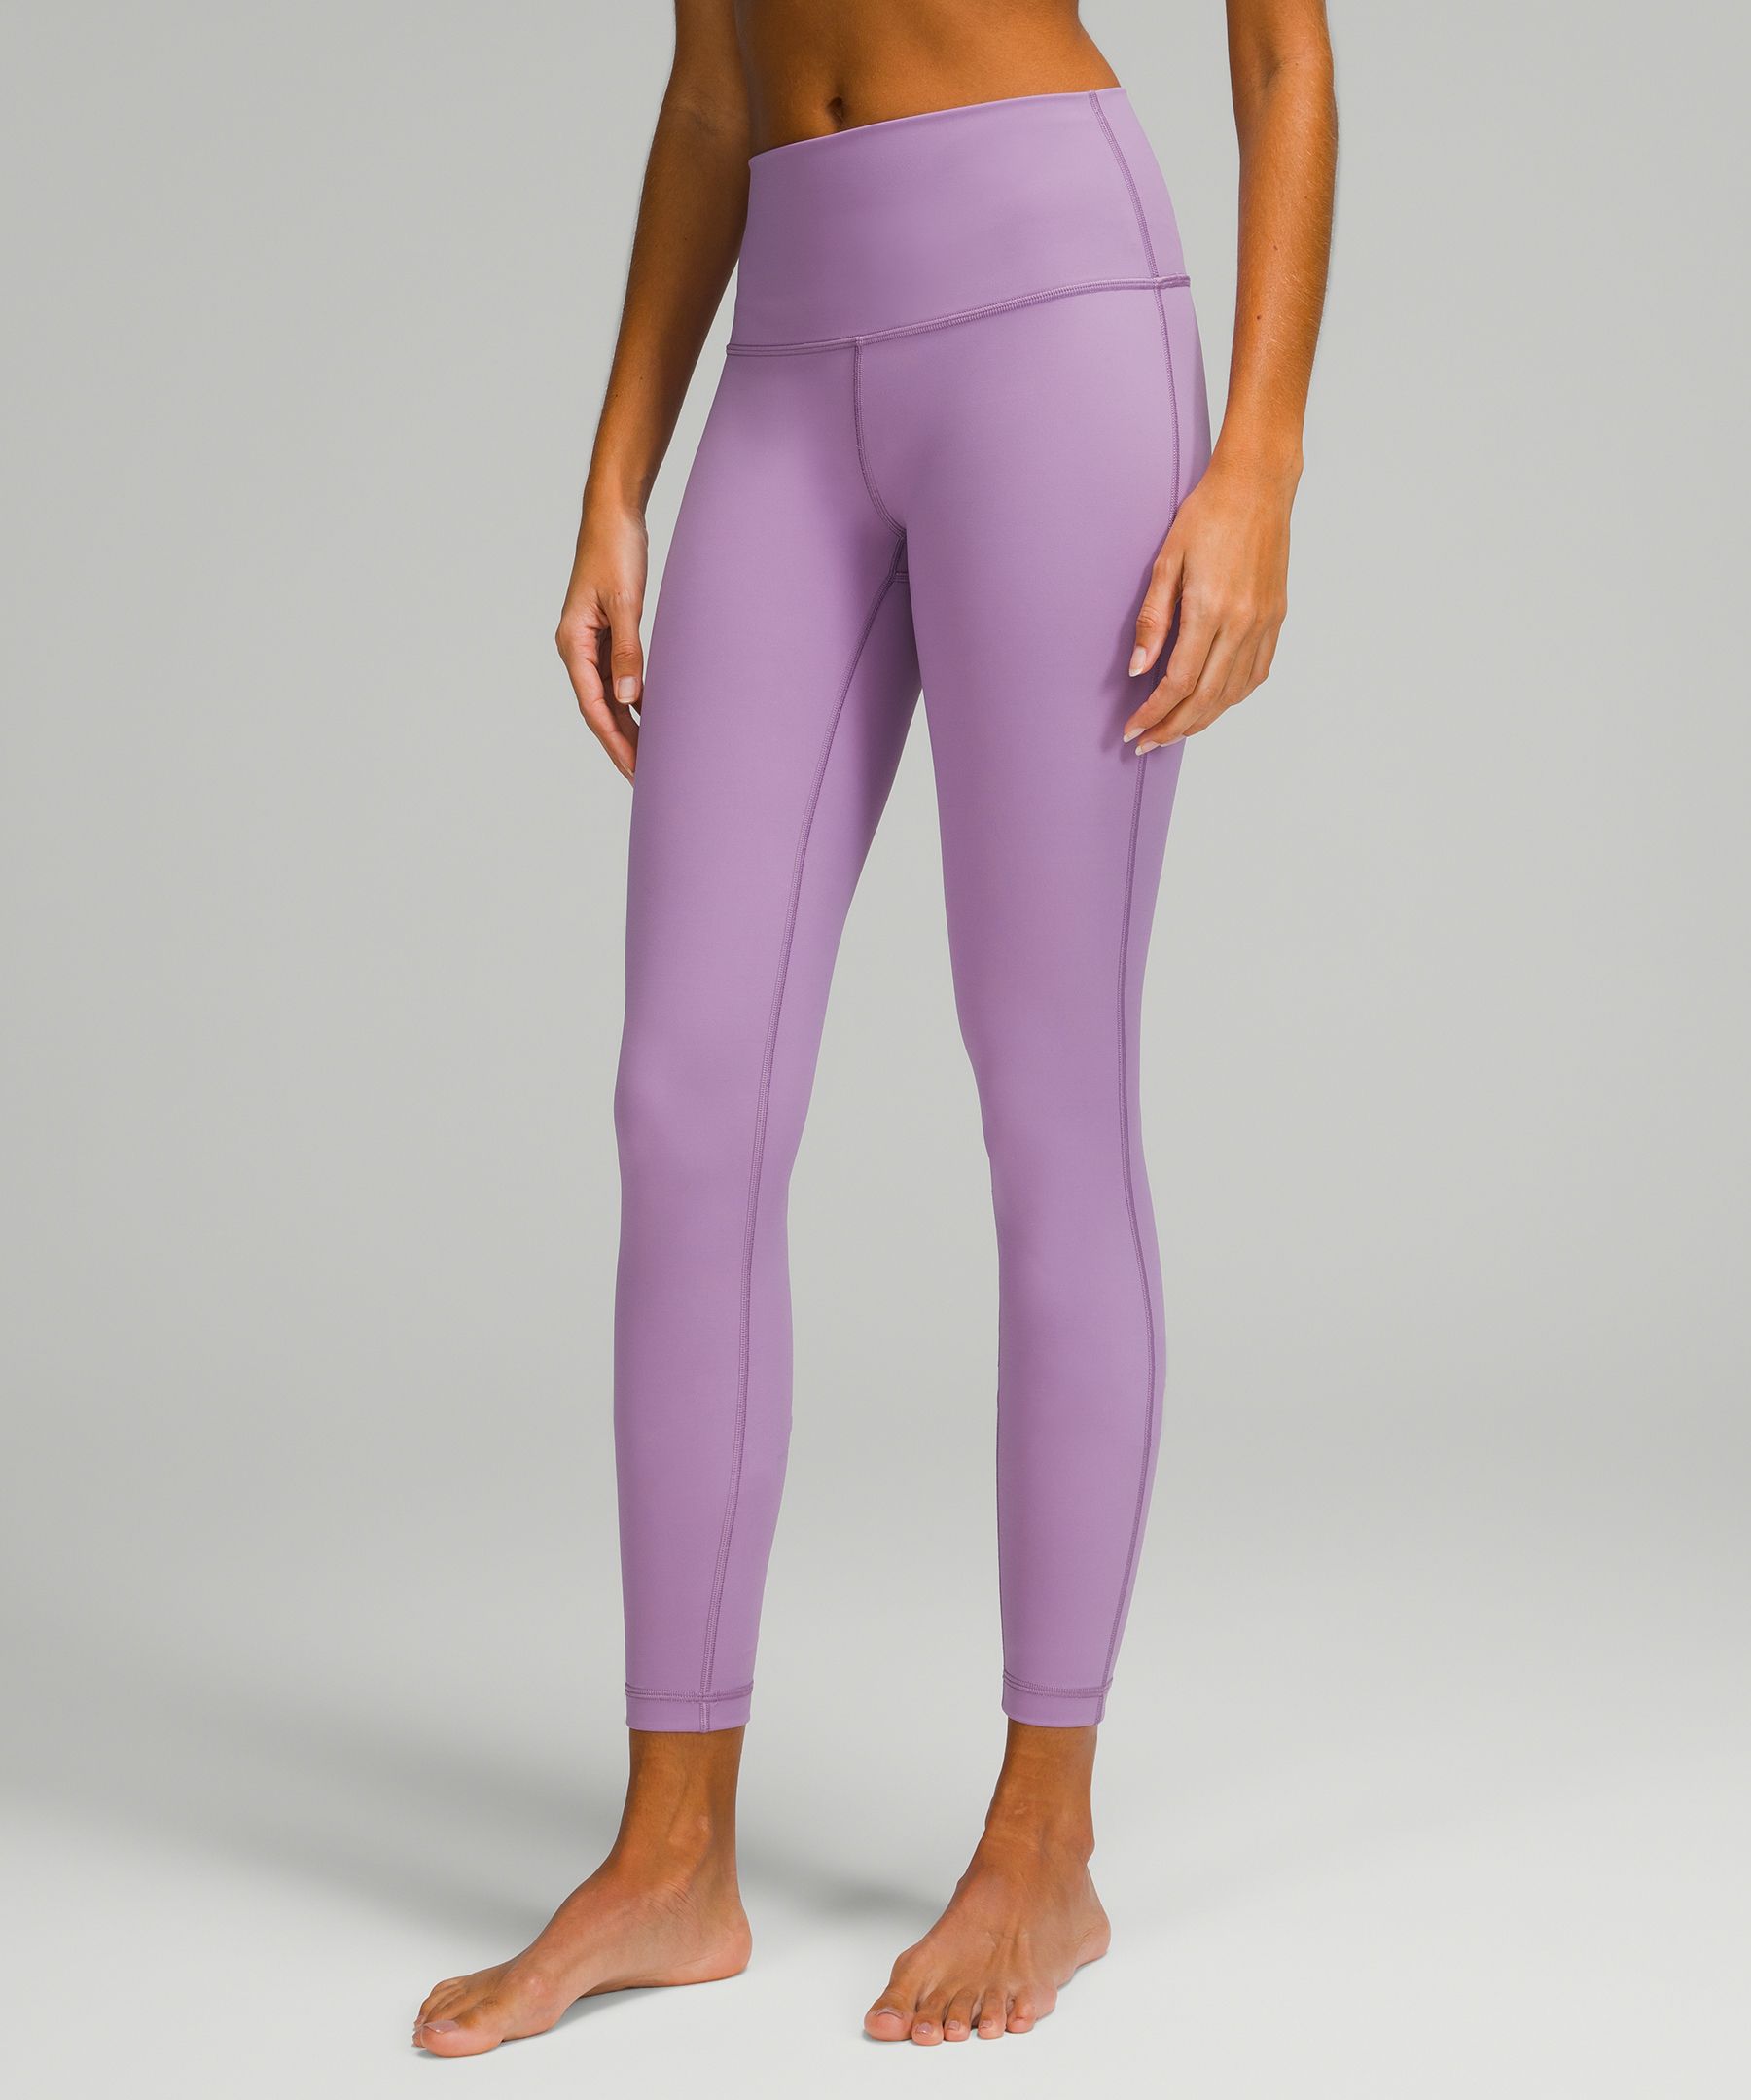 Lululemon Wunder Under High-rise Tights 28" Full-on Luxtreme In Wisteria Purple